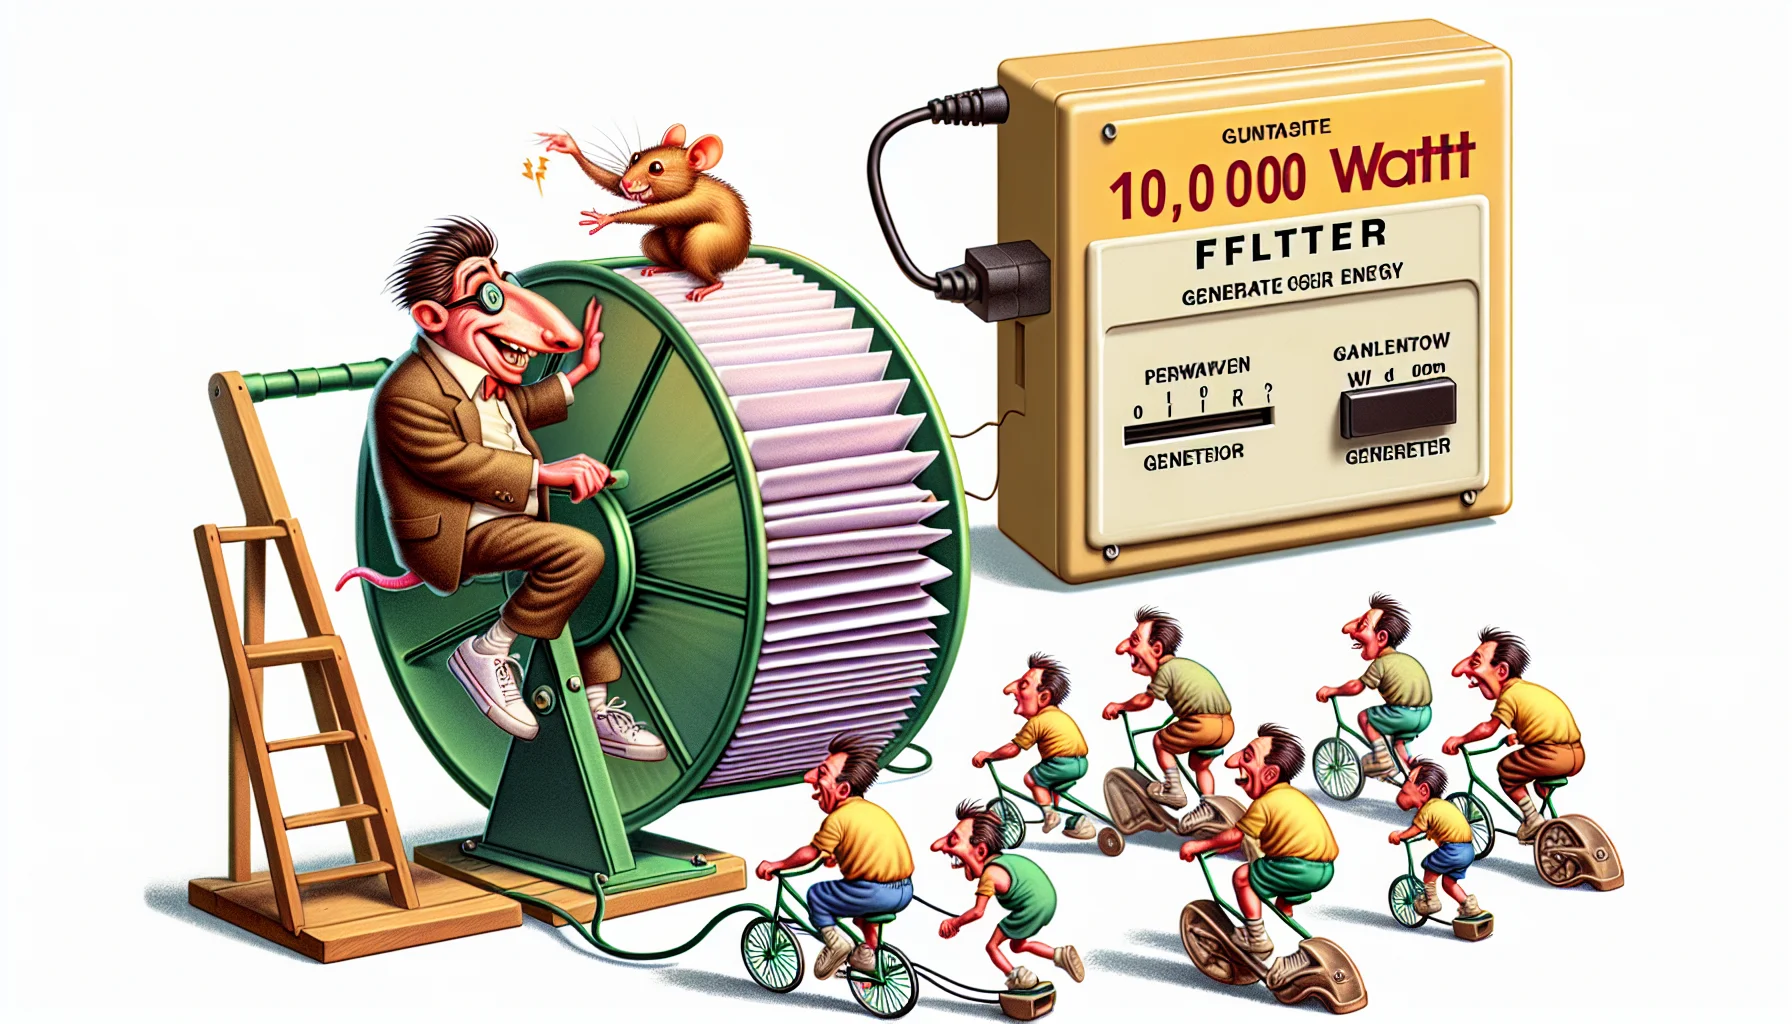 Compose an amusing image that illustrates the concept of a 10,000 Watt filter. This filter humorously encourages individuals to generate energy. The scenario could possibly include eccentric cartoon characters engaging in peculiar activities such as power-generating bicycles, shoe generators, or human hamster wheels to humorously demonstrate the challenge and excitement of generating 10,000 watts of electricity.